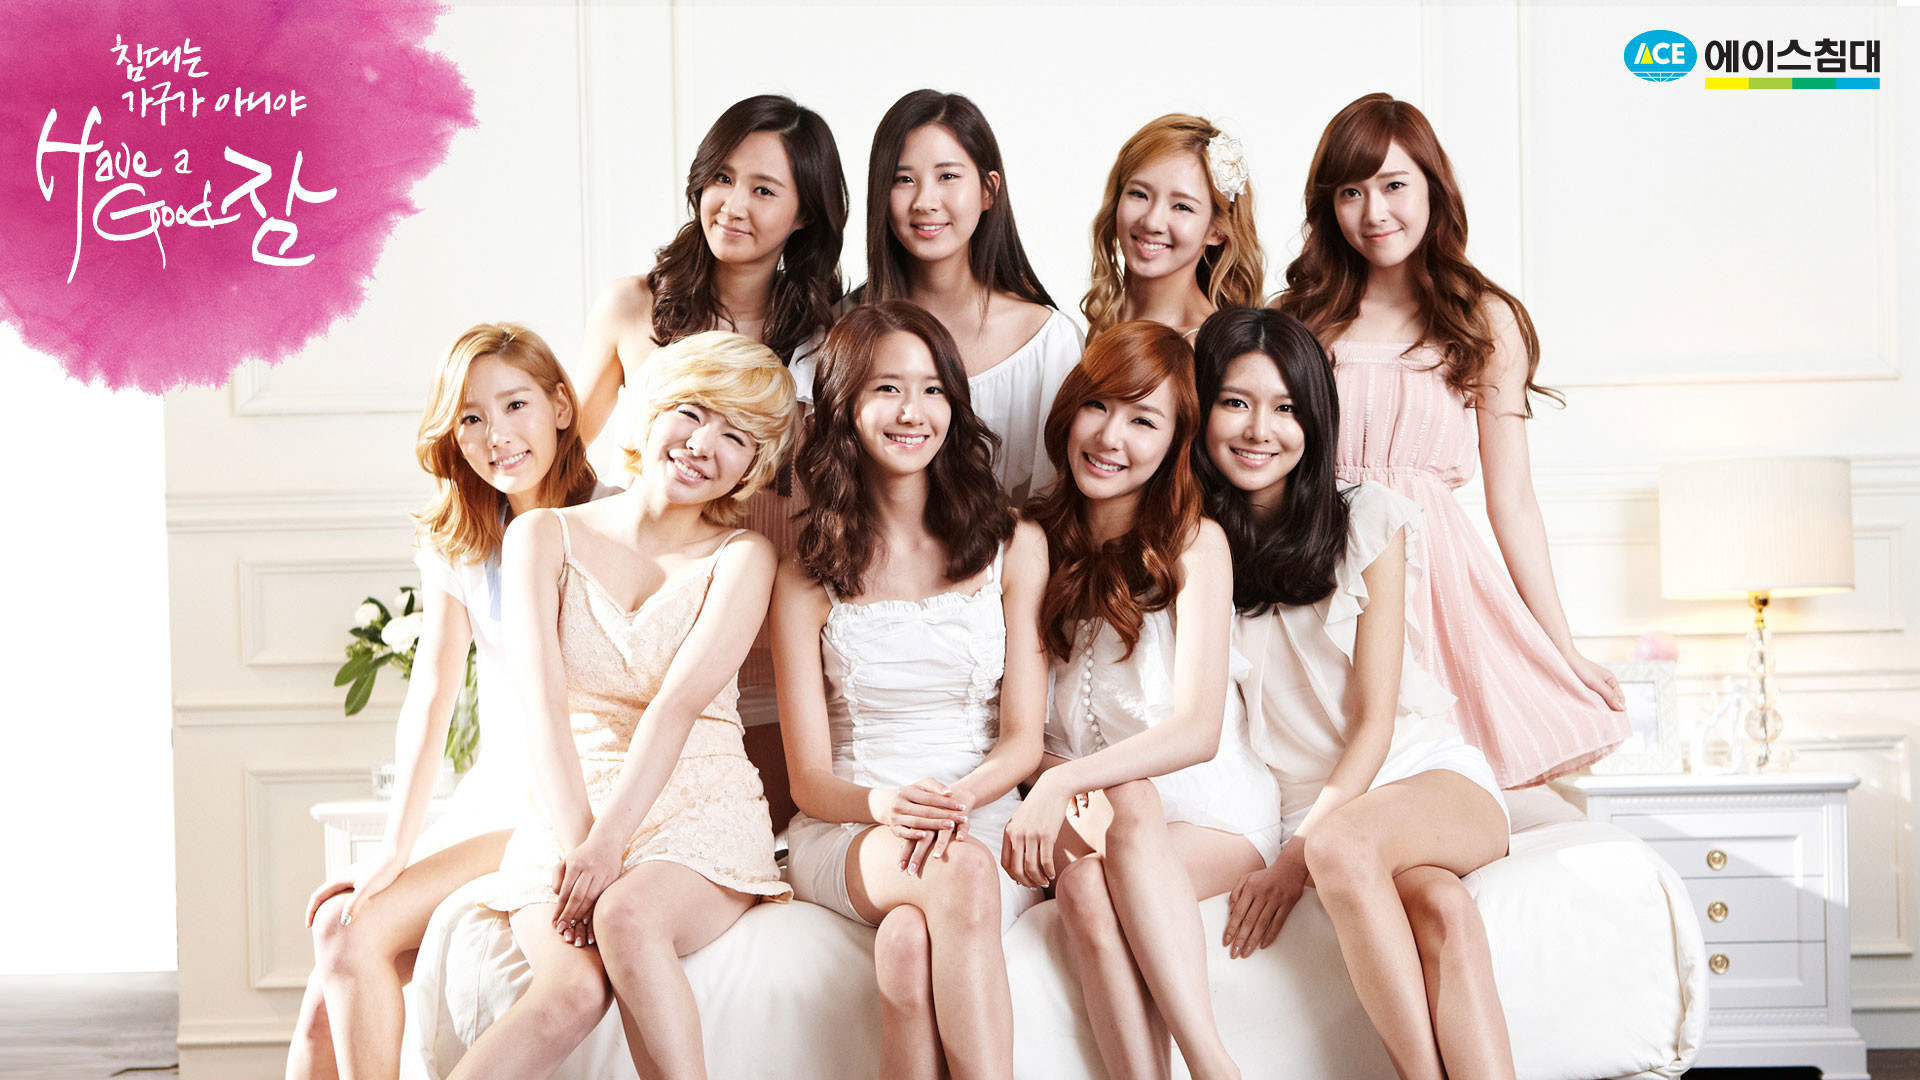 1920x1080 Girls Generation Ace Bed wallpaper